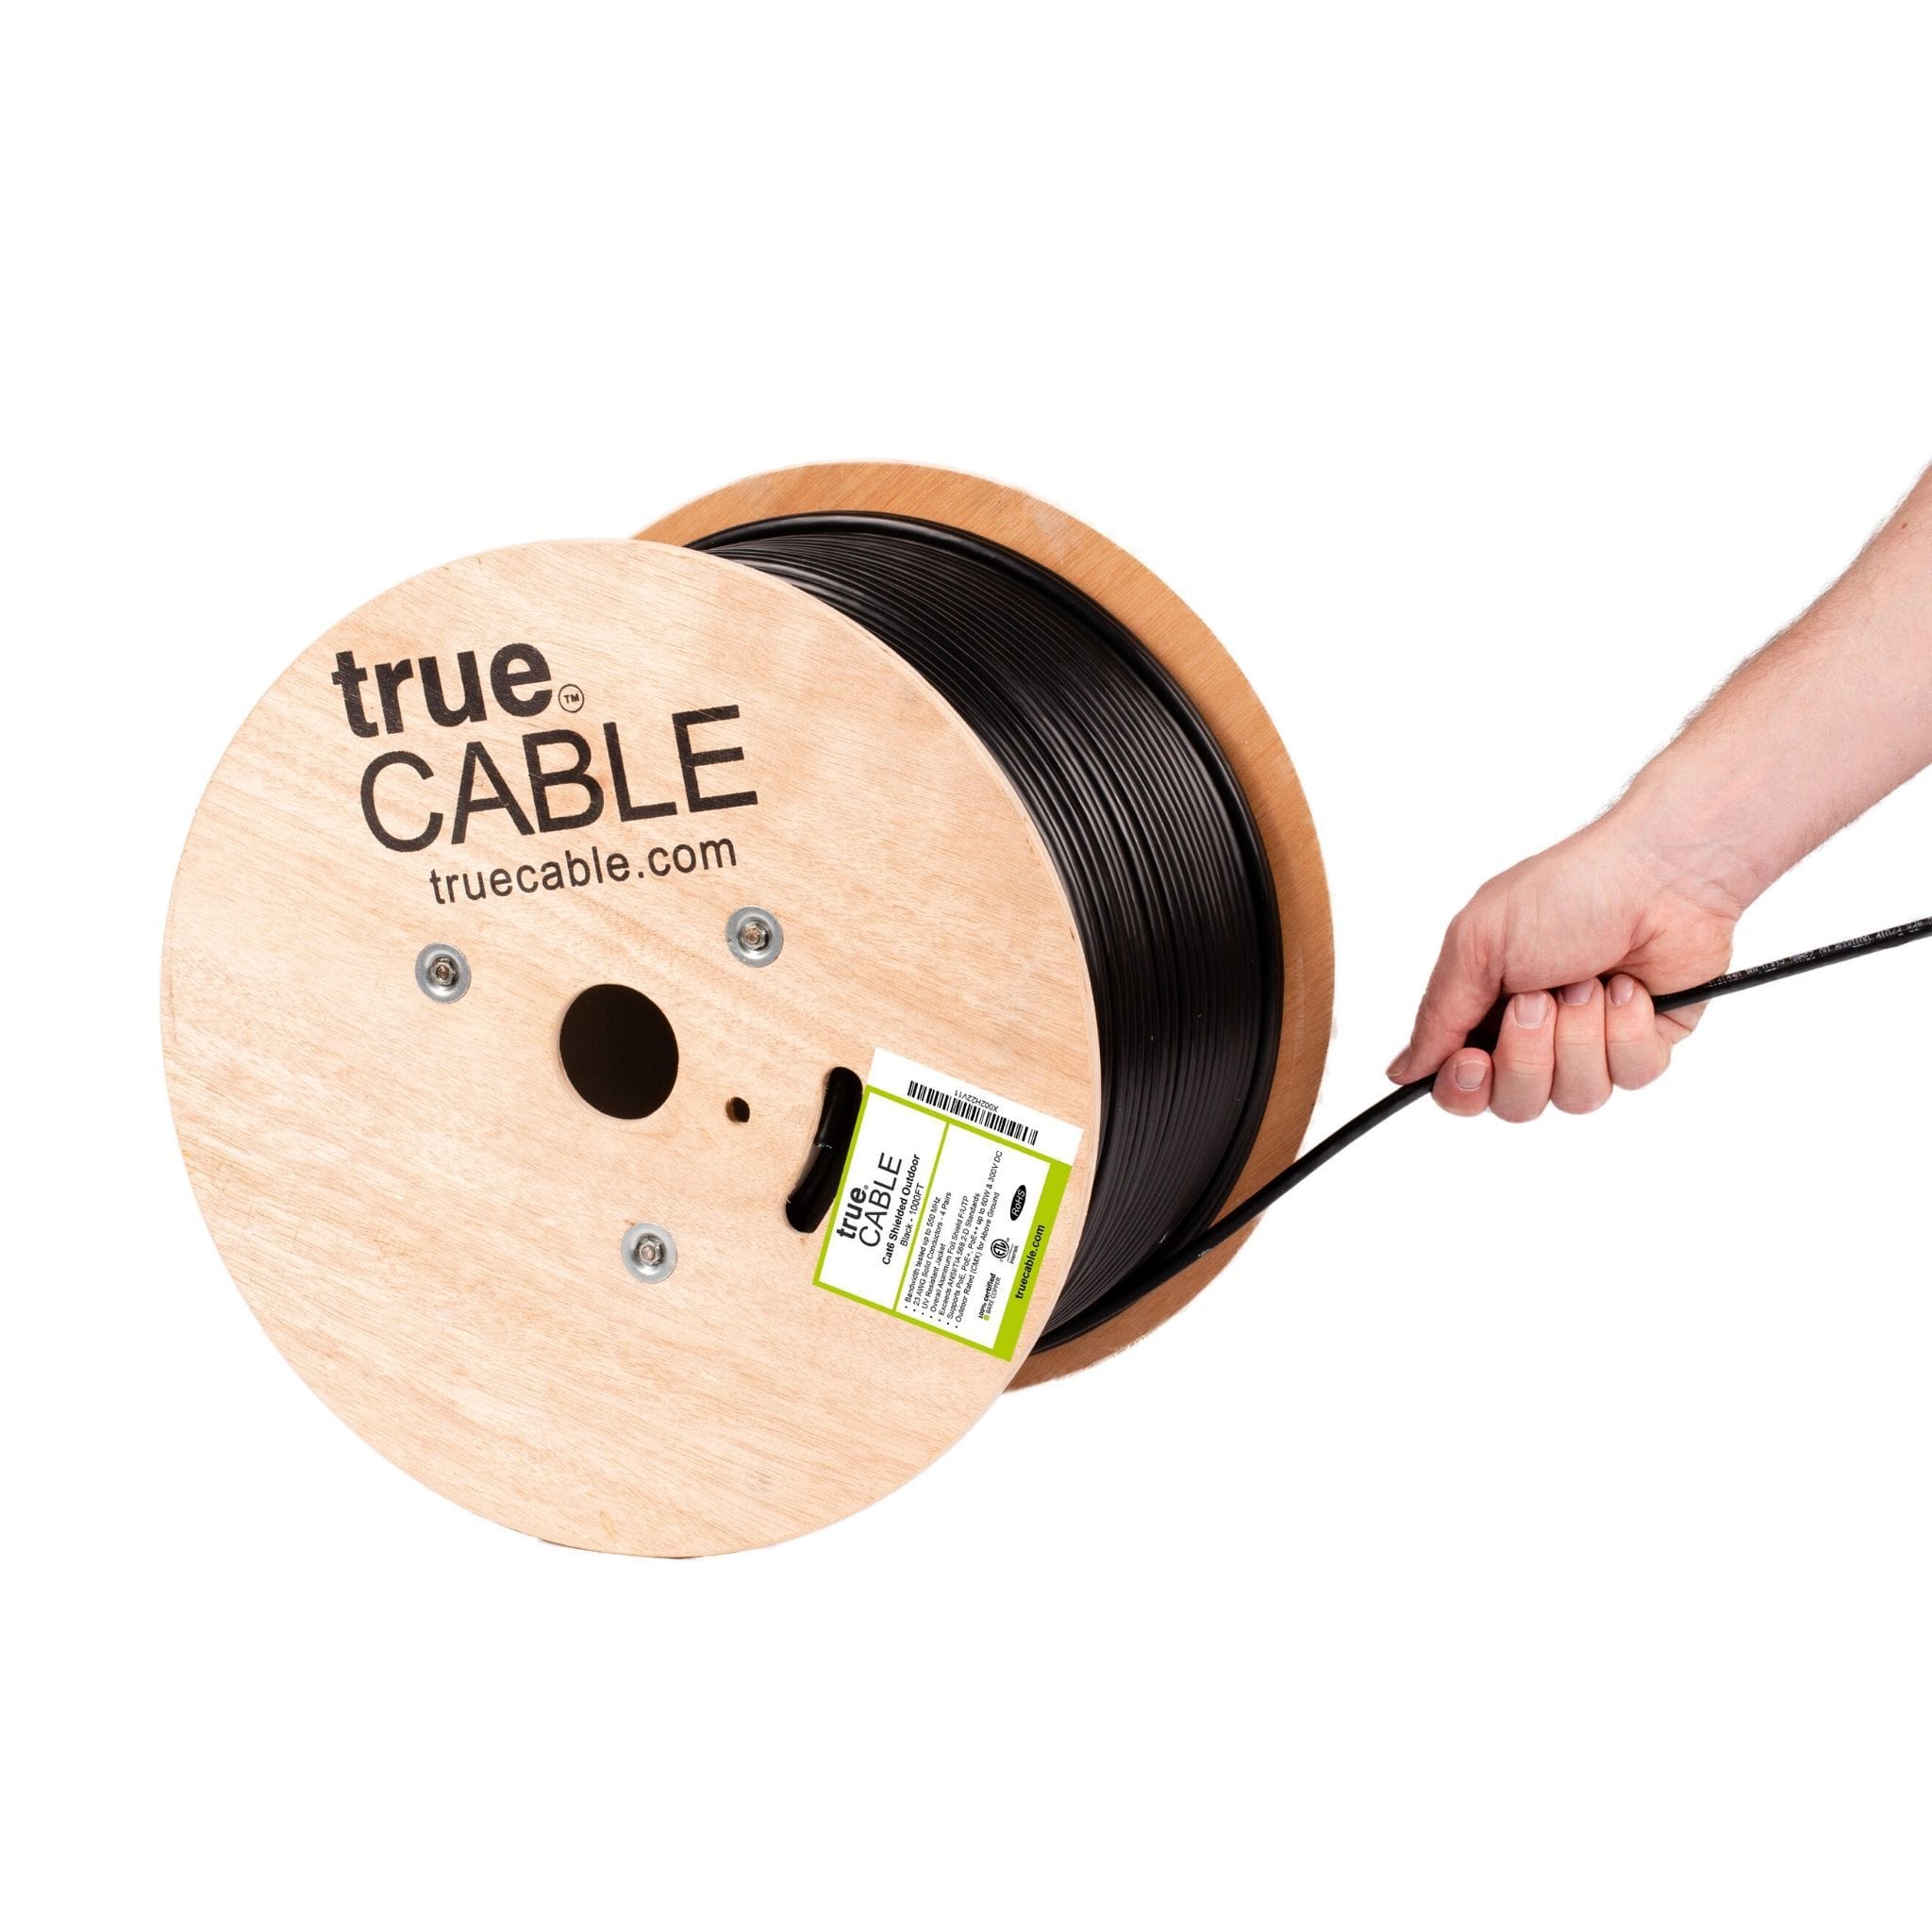 trueCABLE Wire and Cable Caddy with Wheels and Pull Strap, Industrial Grade  Steel Wire Dispenser, Holds Cable Reels Up to 20 Diameter and 100 lb